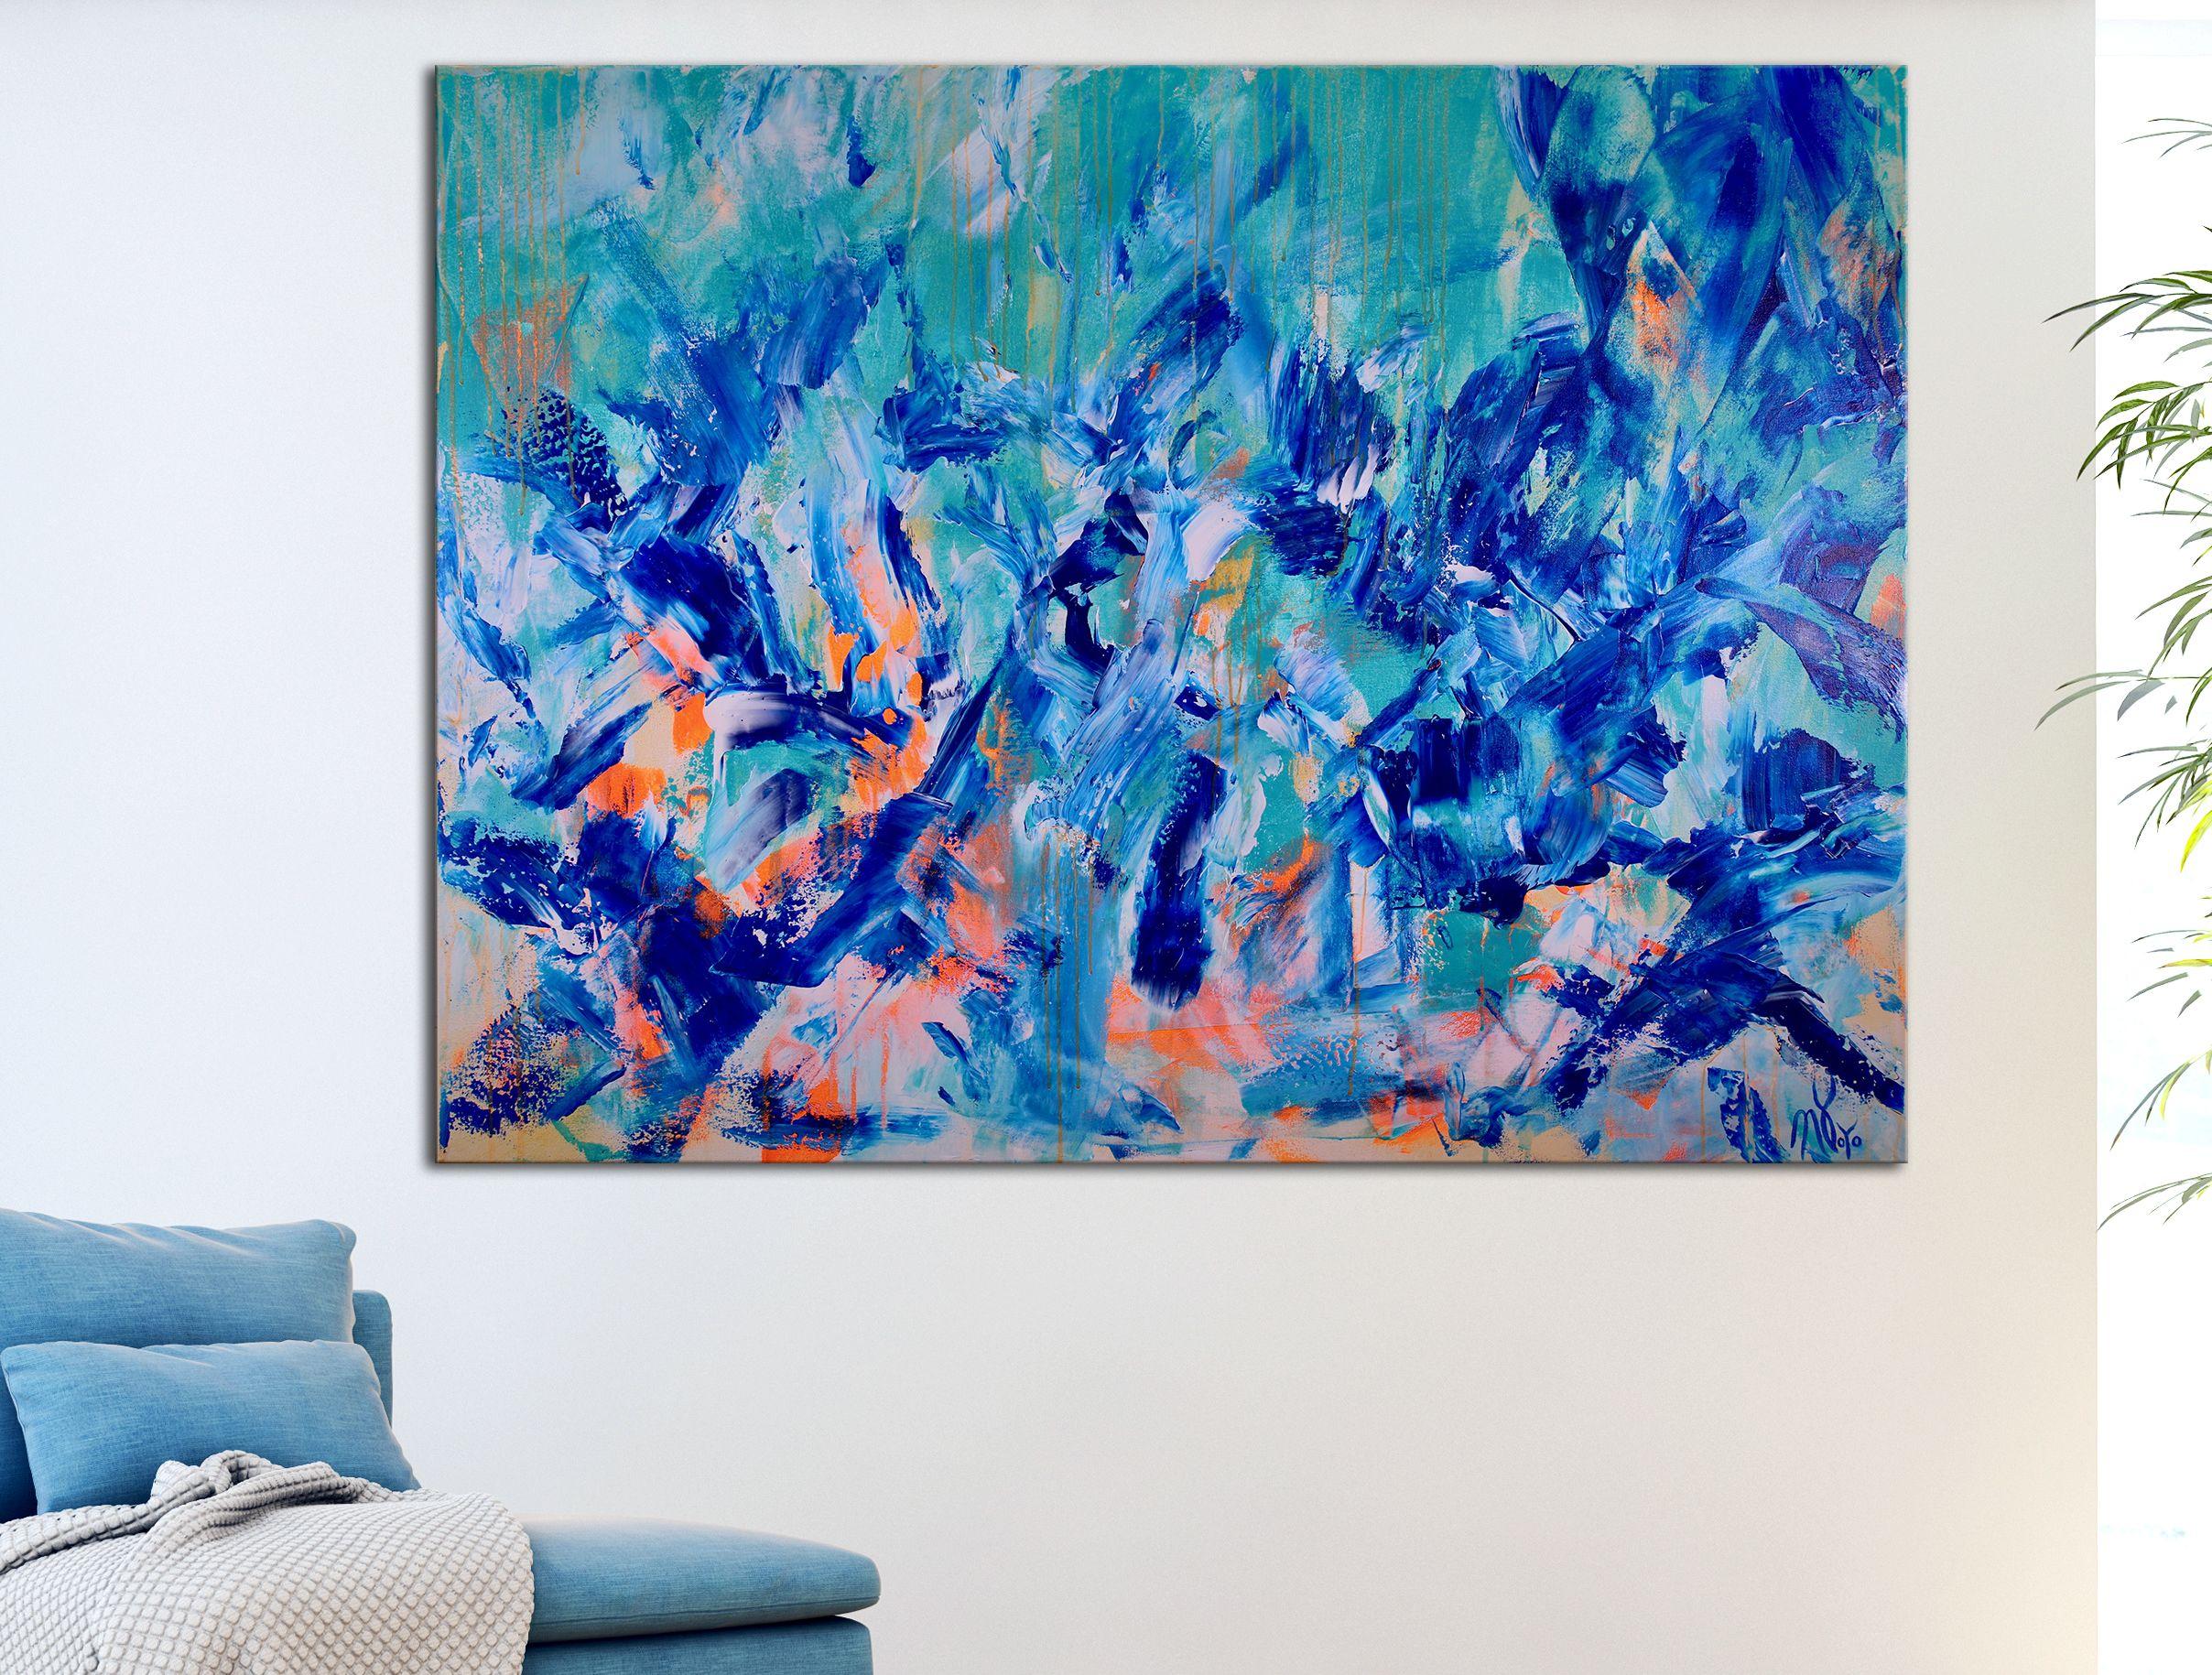 A closer Look (Open Skies), Painting, Acrylic on Canvas - Blue Abstract Painting by Nestor Toro